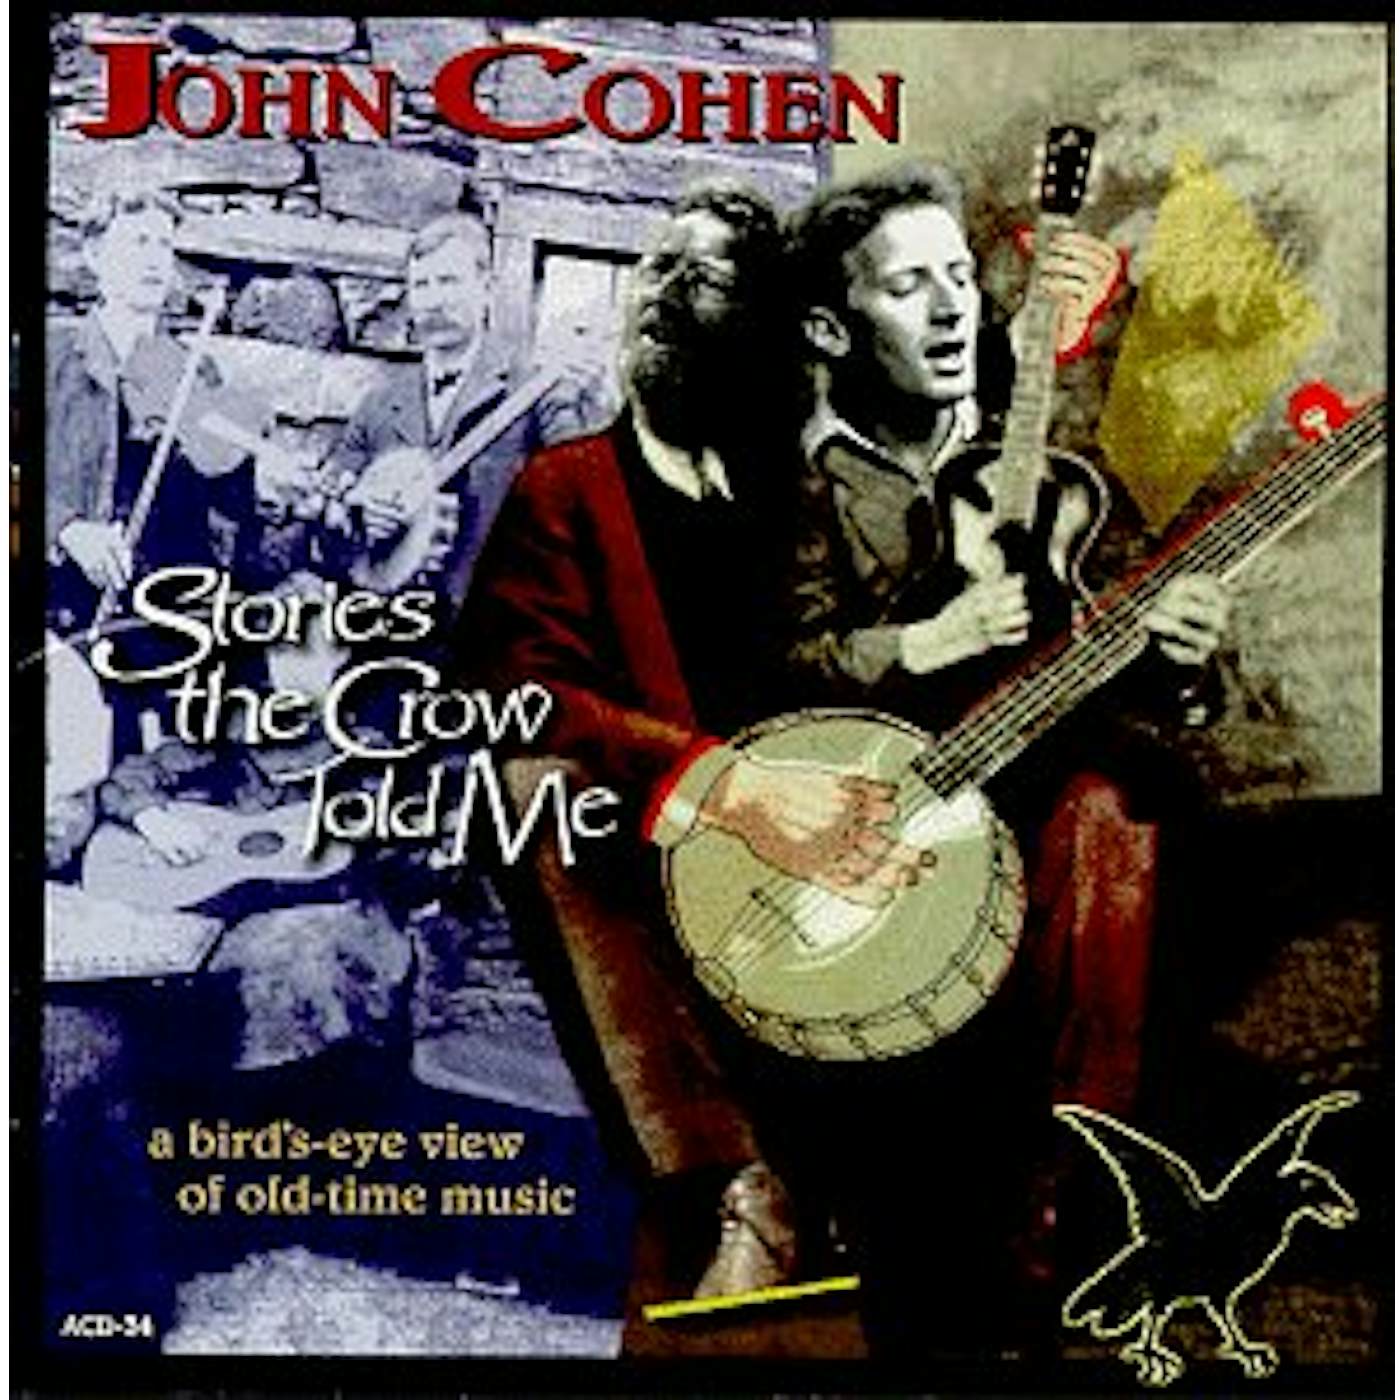 John Cohen STORIES THE CROW TOLD ME CD